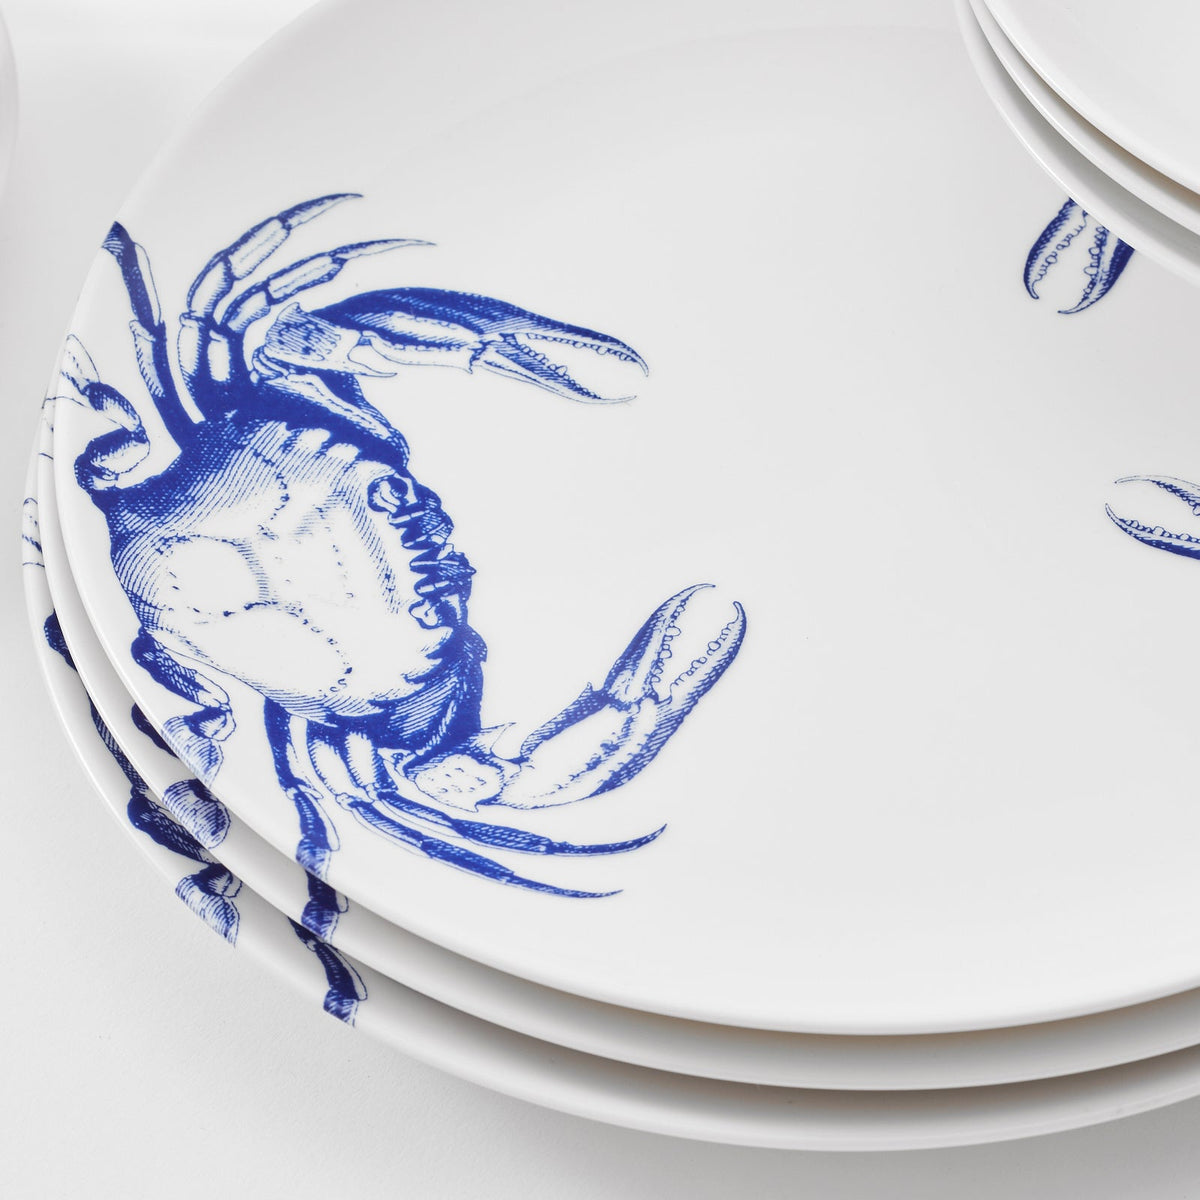 A set of Crab Table for 4 porcelain dinner plates with blue and white designs, including crabs, by Caskata.